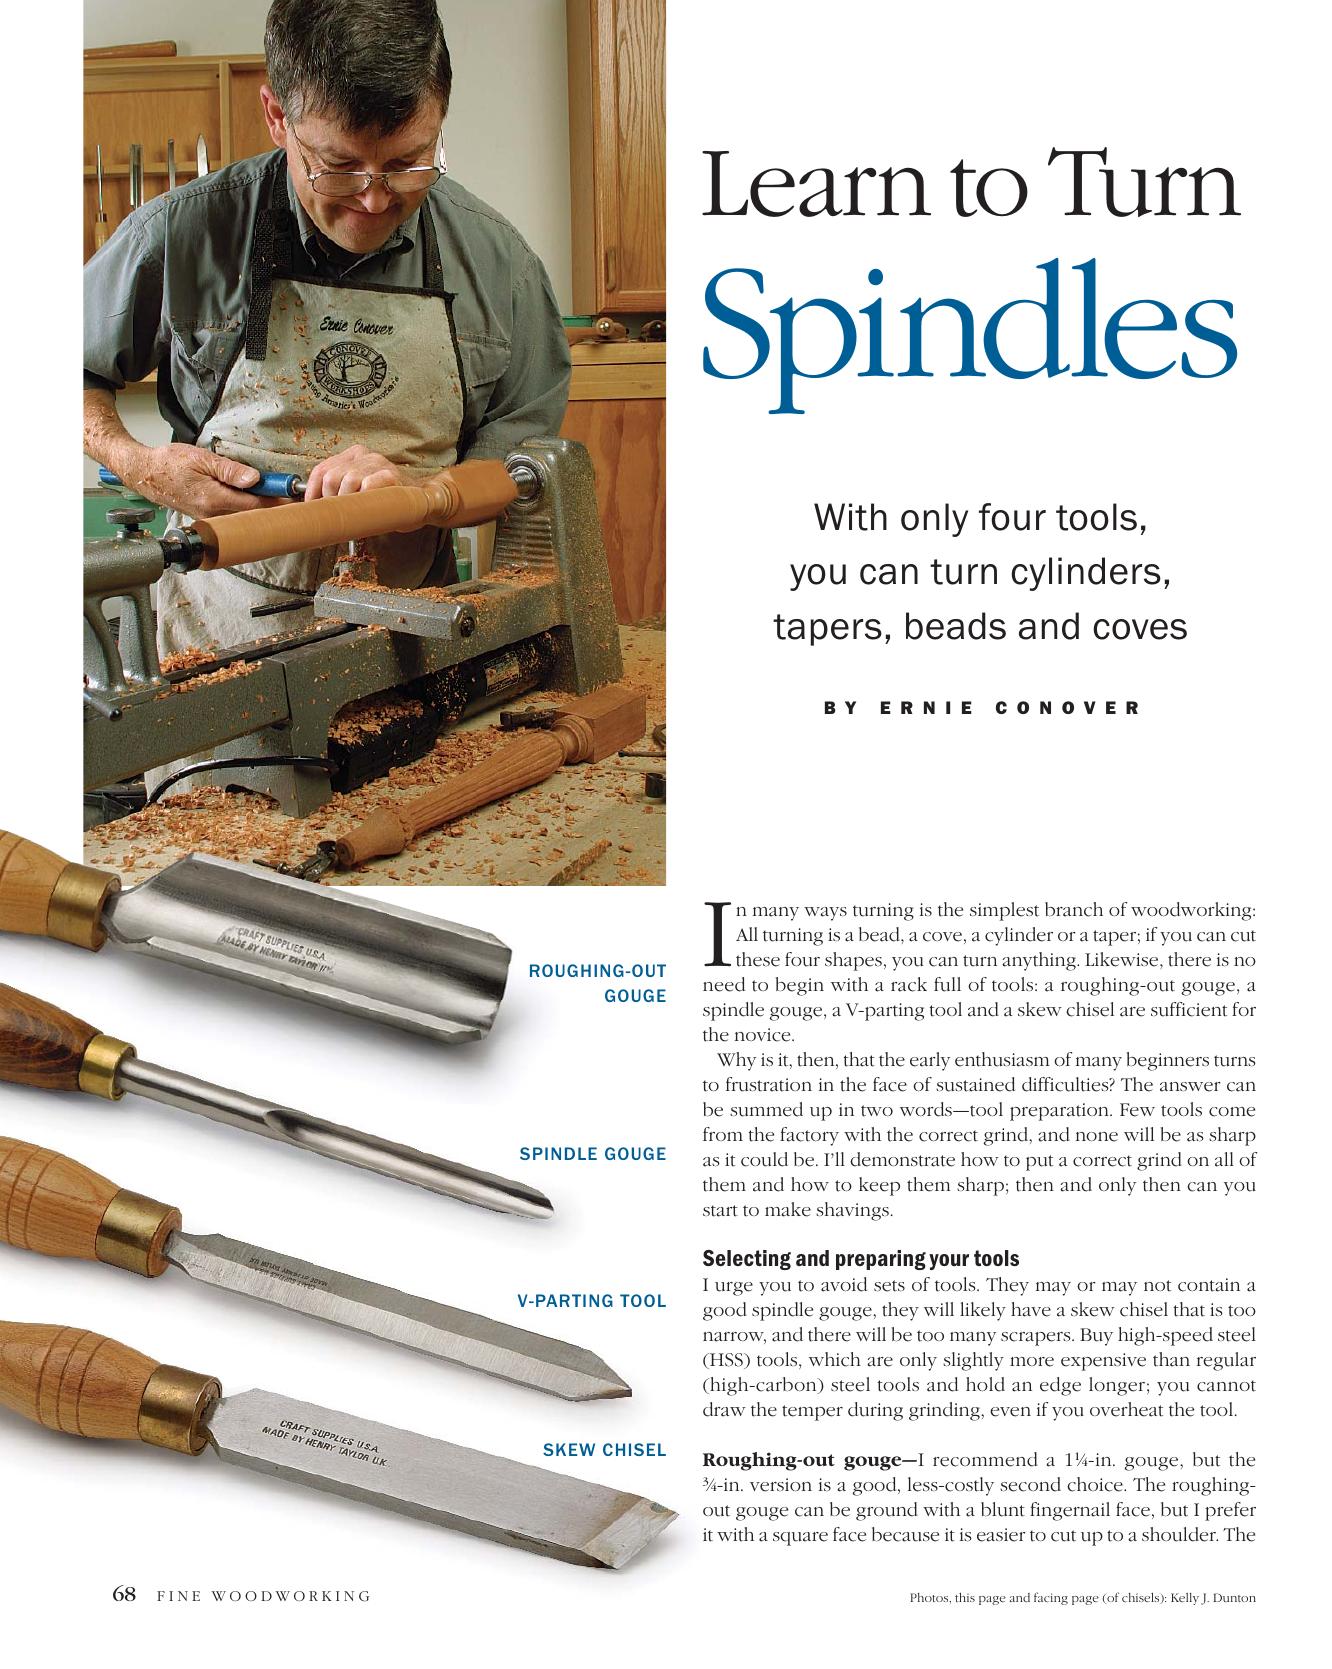 Learn to Turn Spindles by Ernie Conover